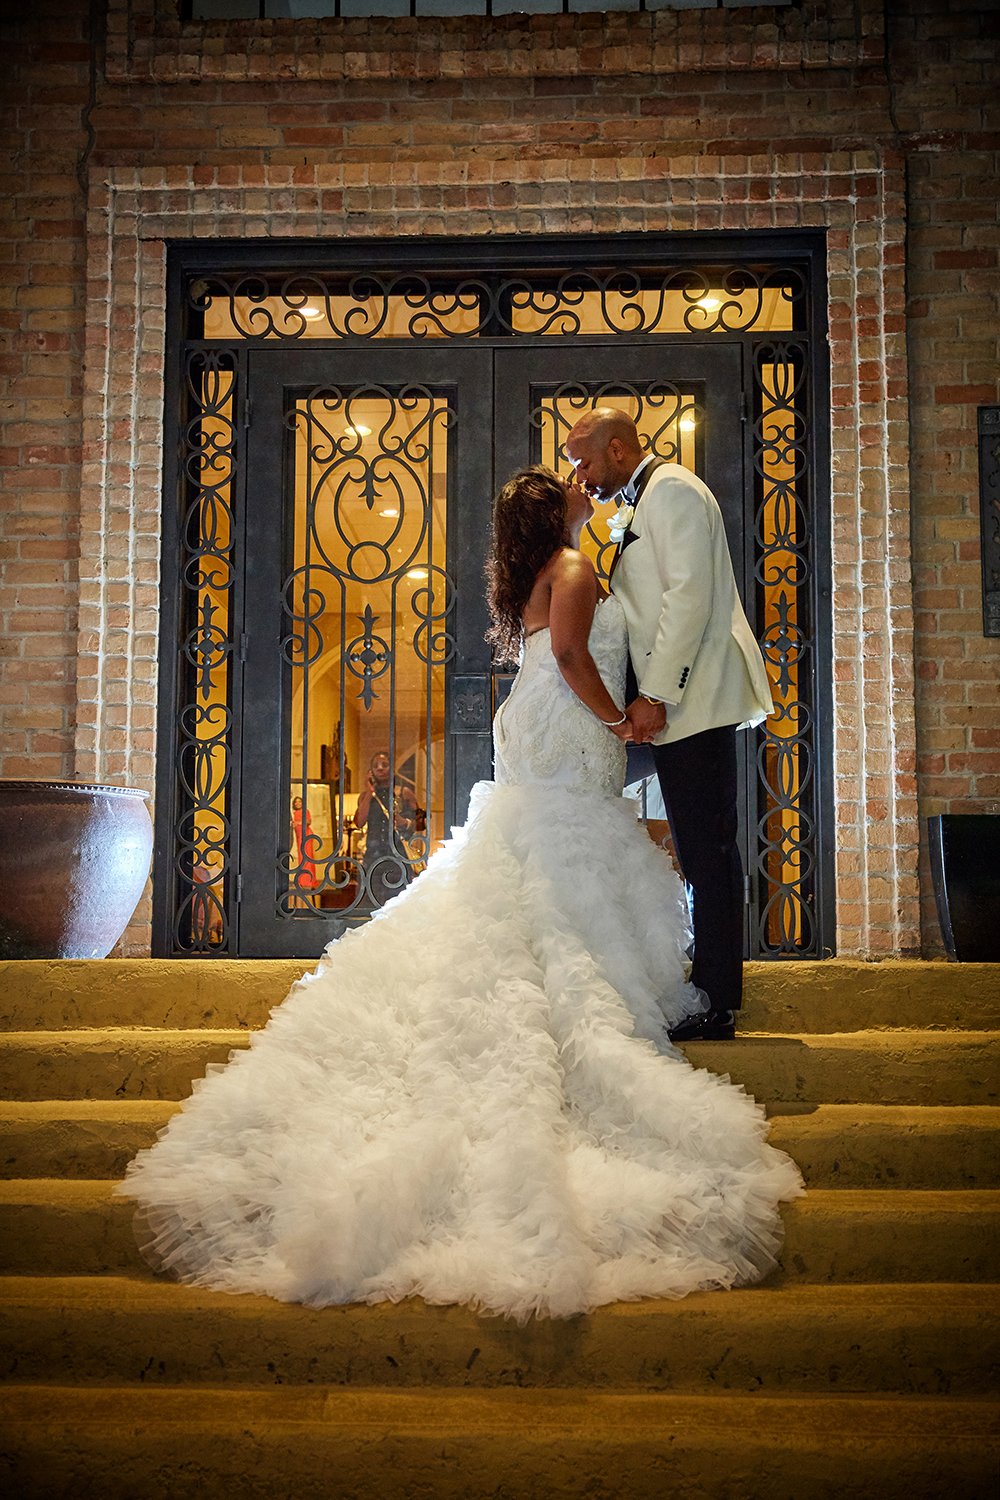 couple on the stairs at the end of the night, wedding dress with lush train and details feathers